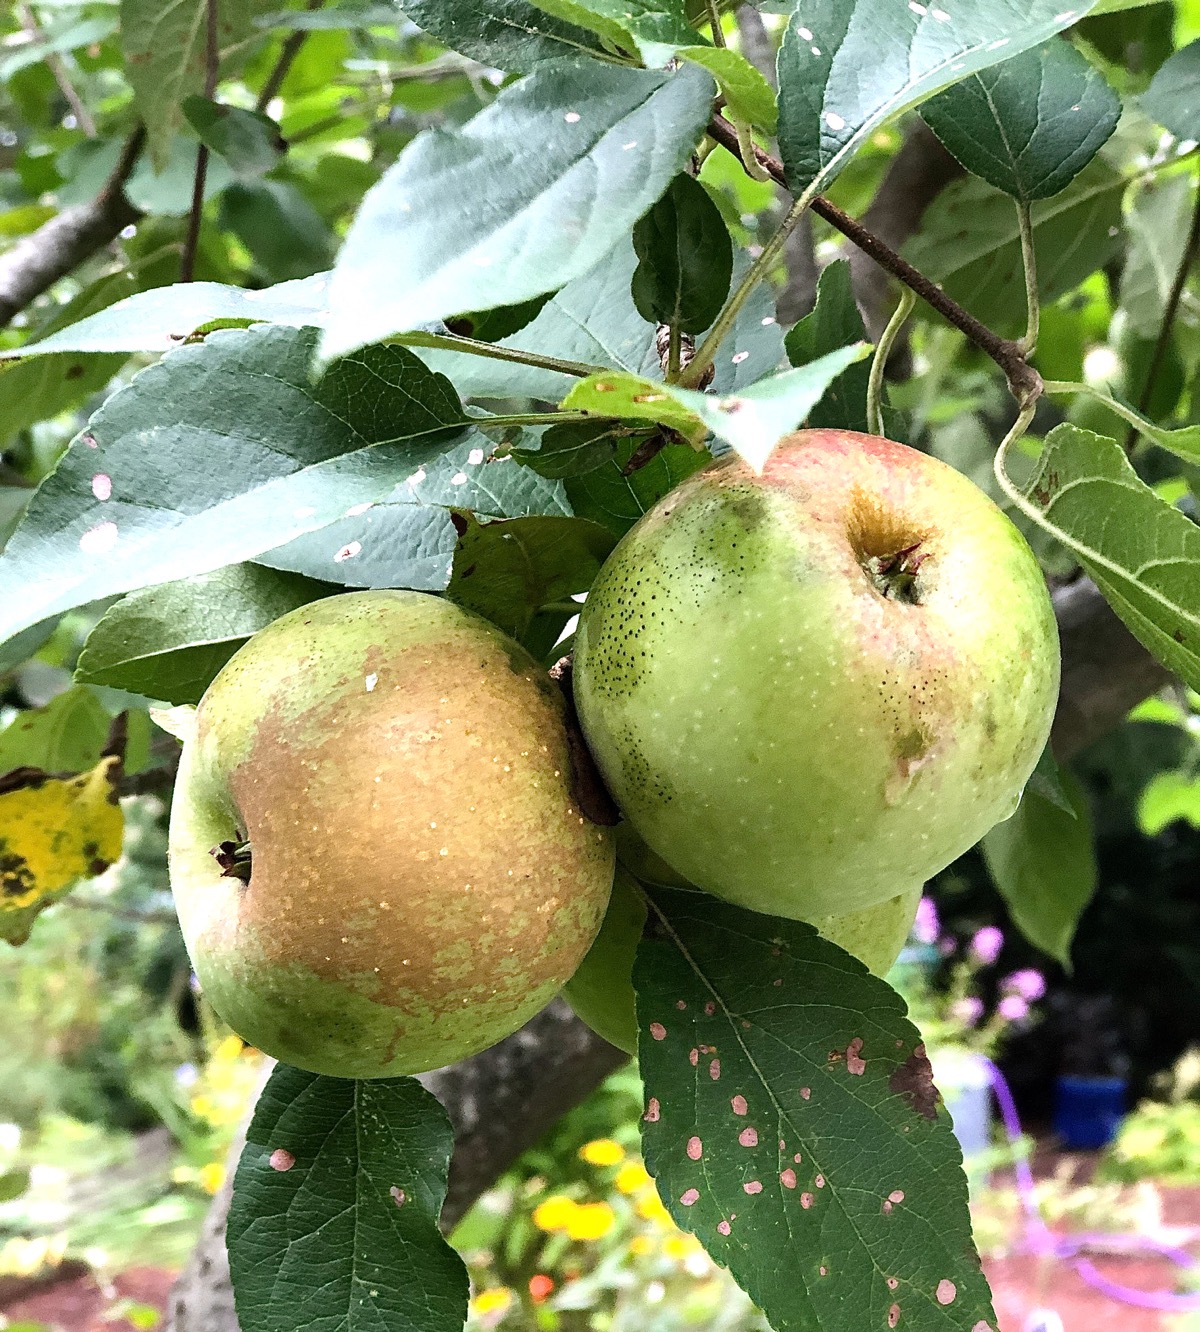 Apples growing on a tree.